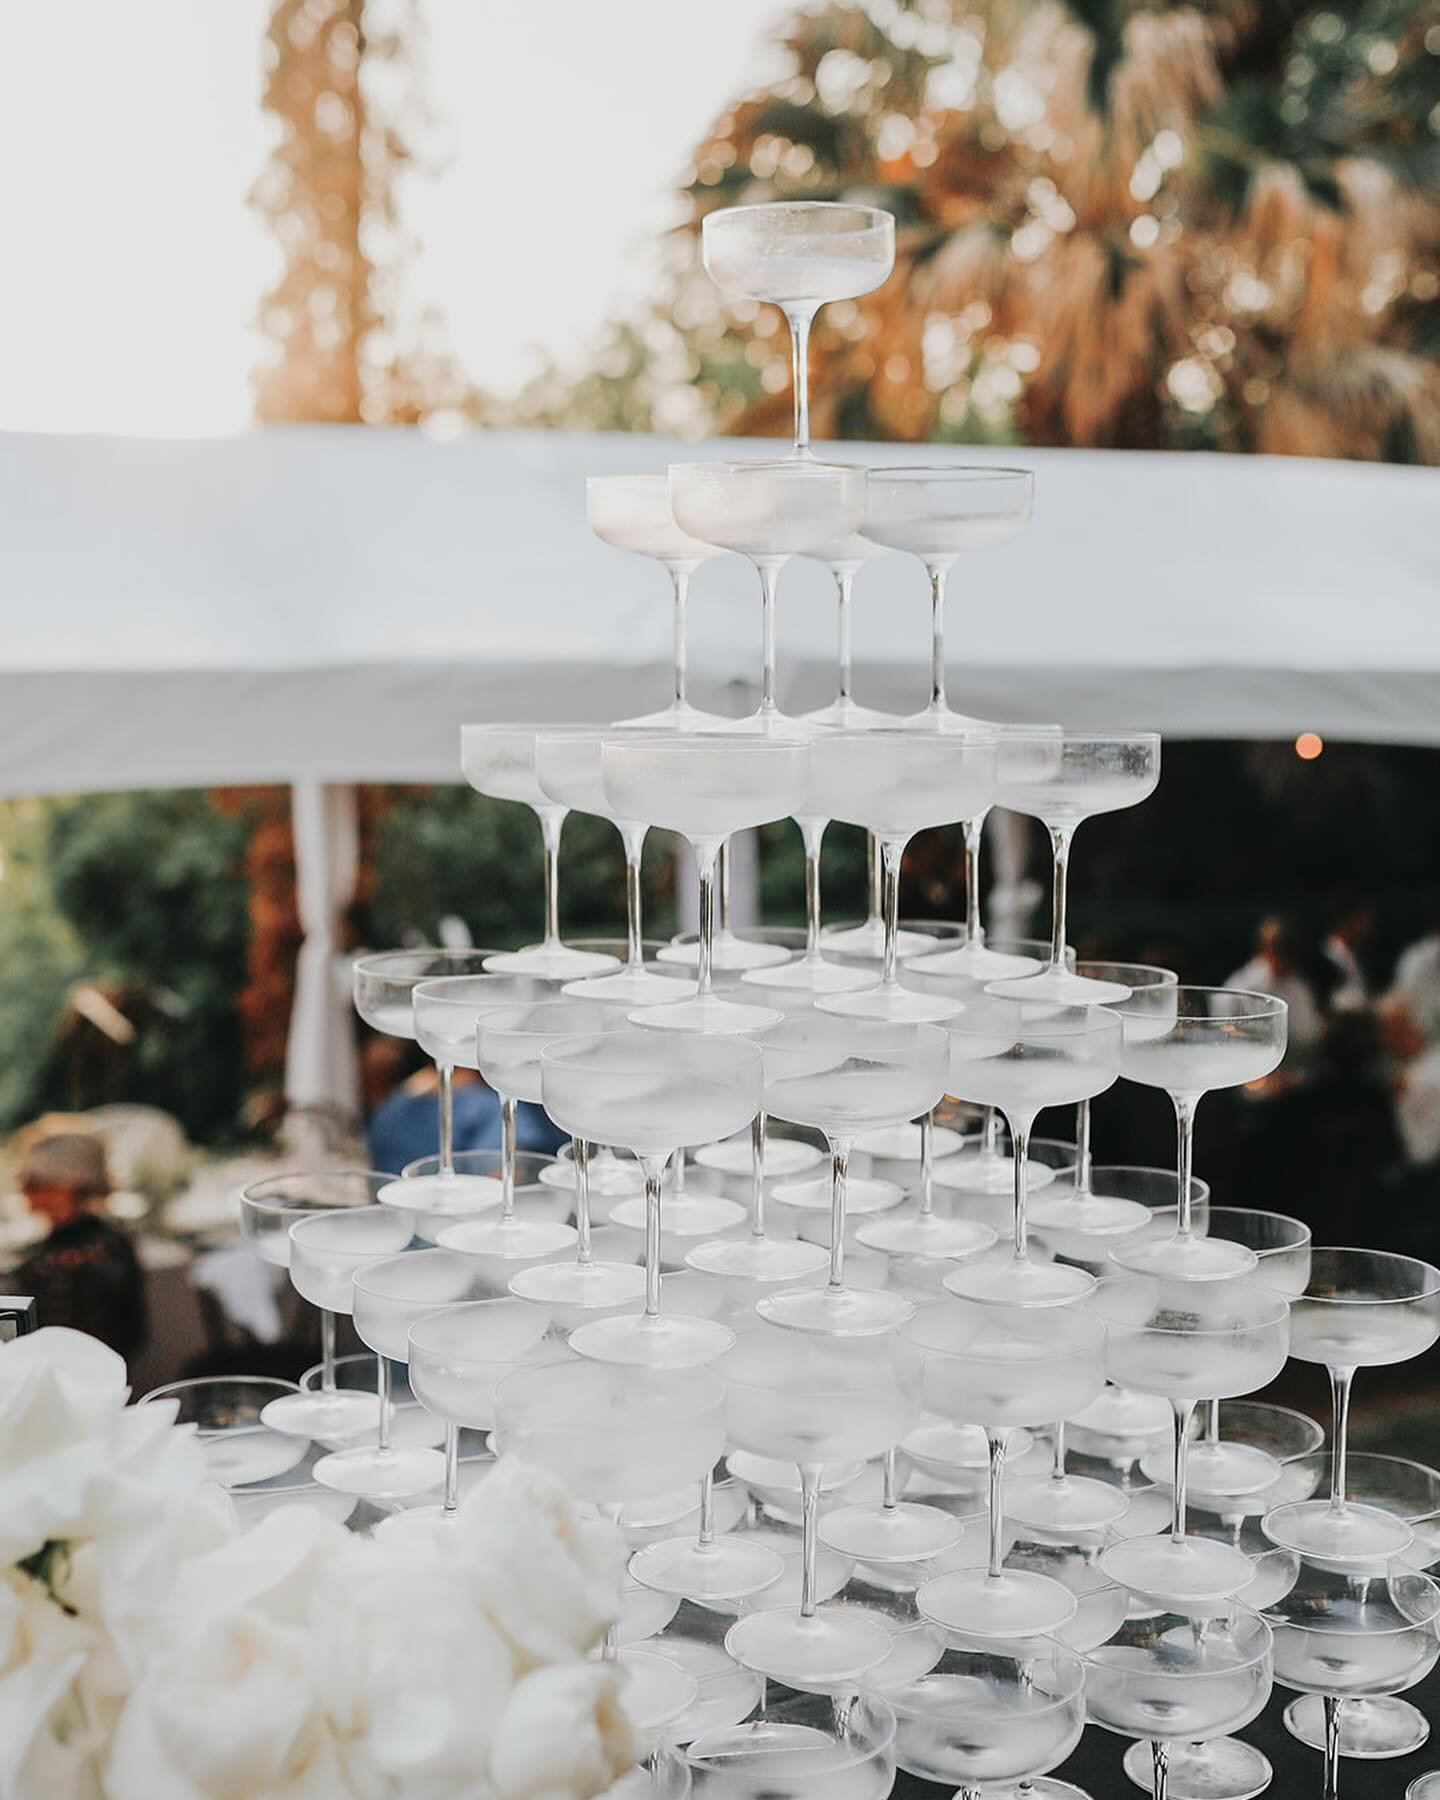 Champagne towers are no small feat (trust us) 🥂

#austincatering #austinevents #weddingphotography